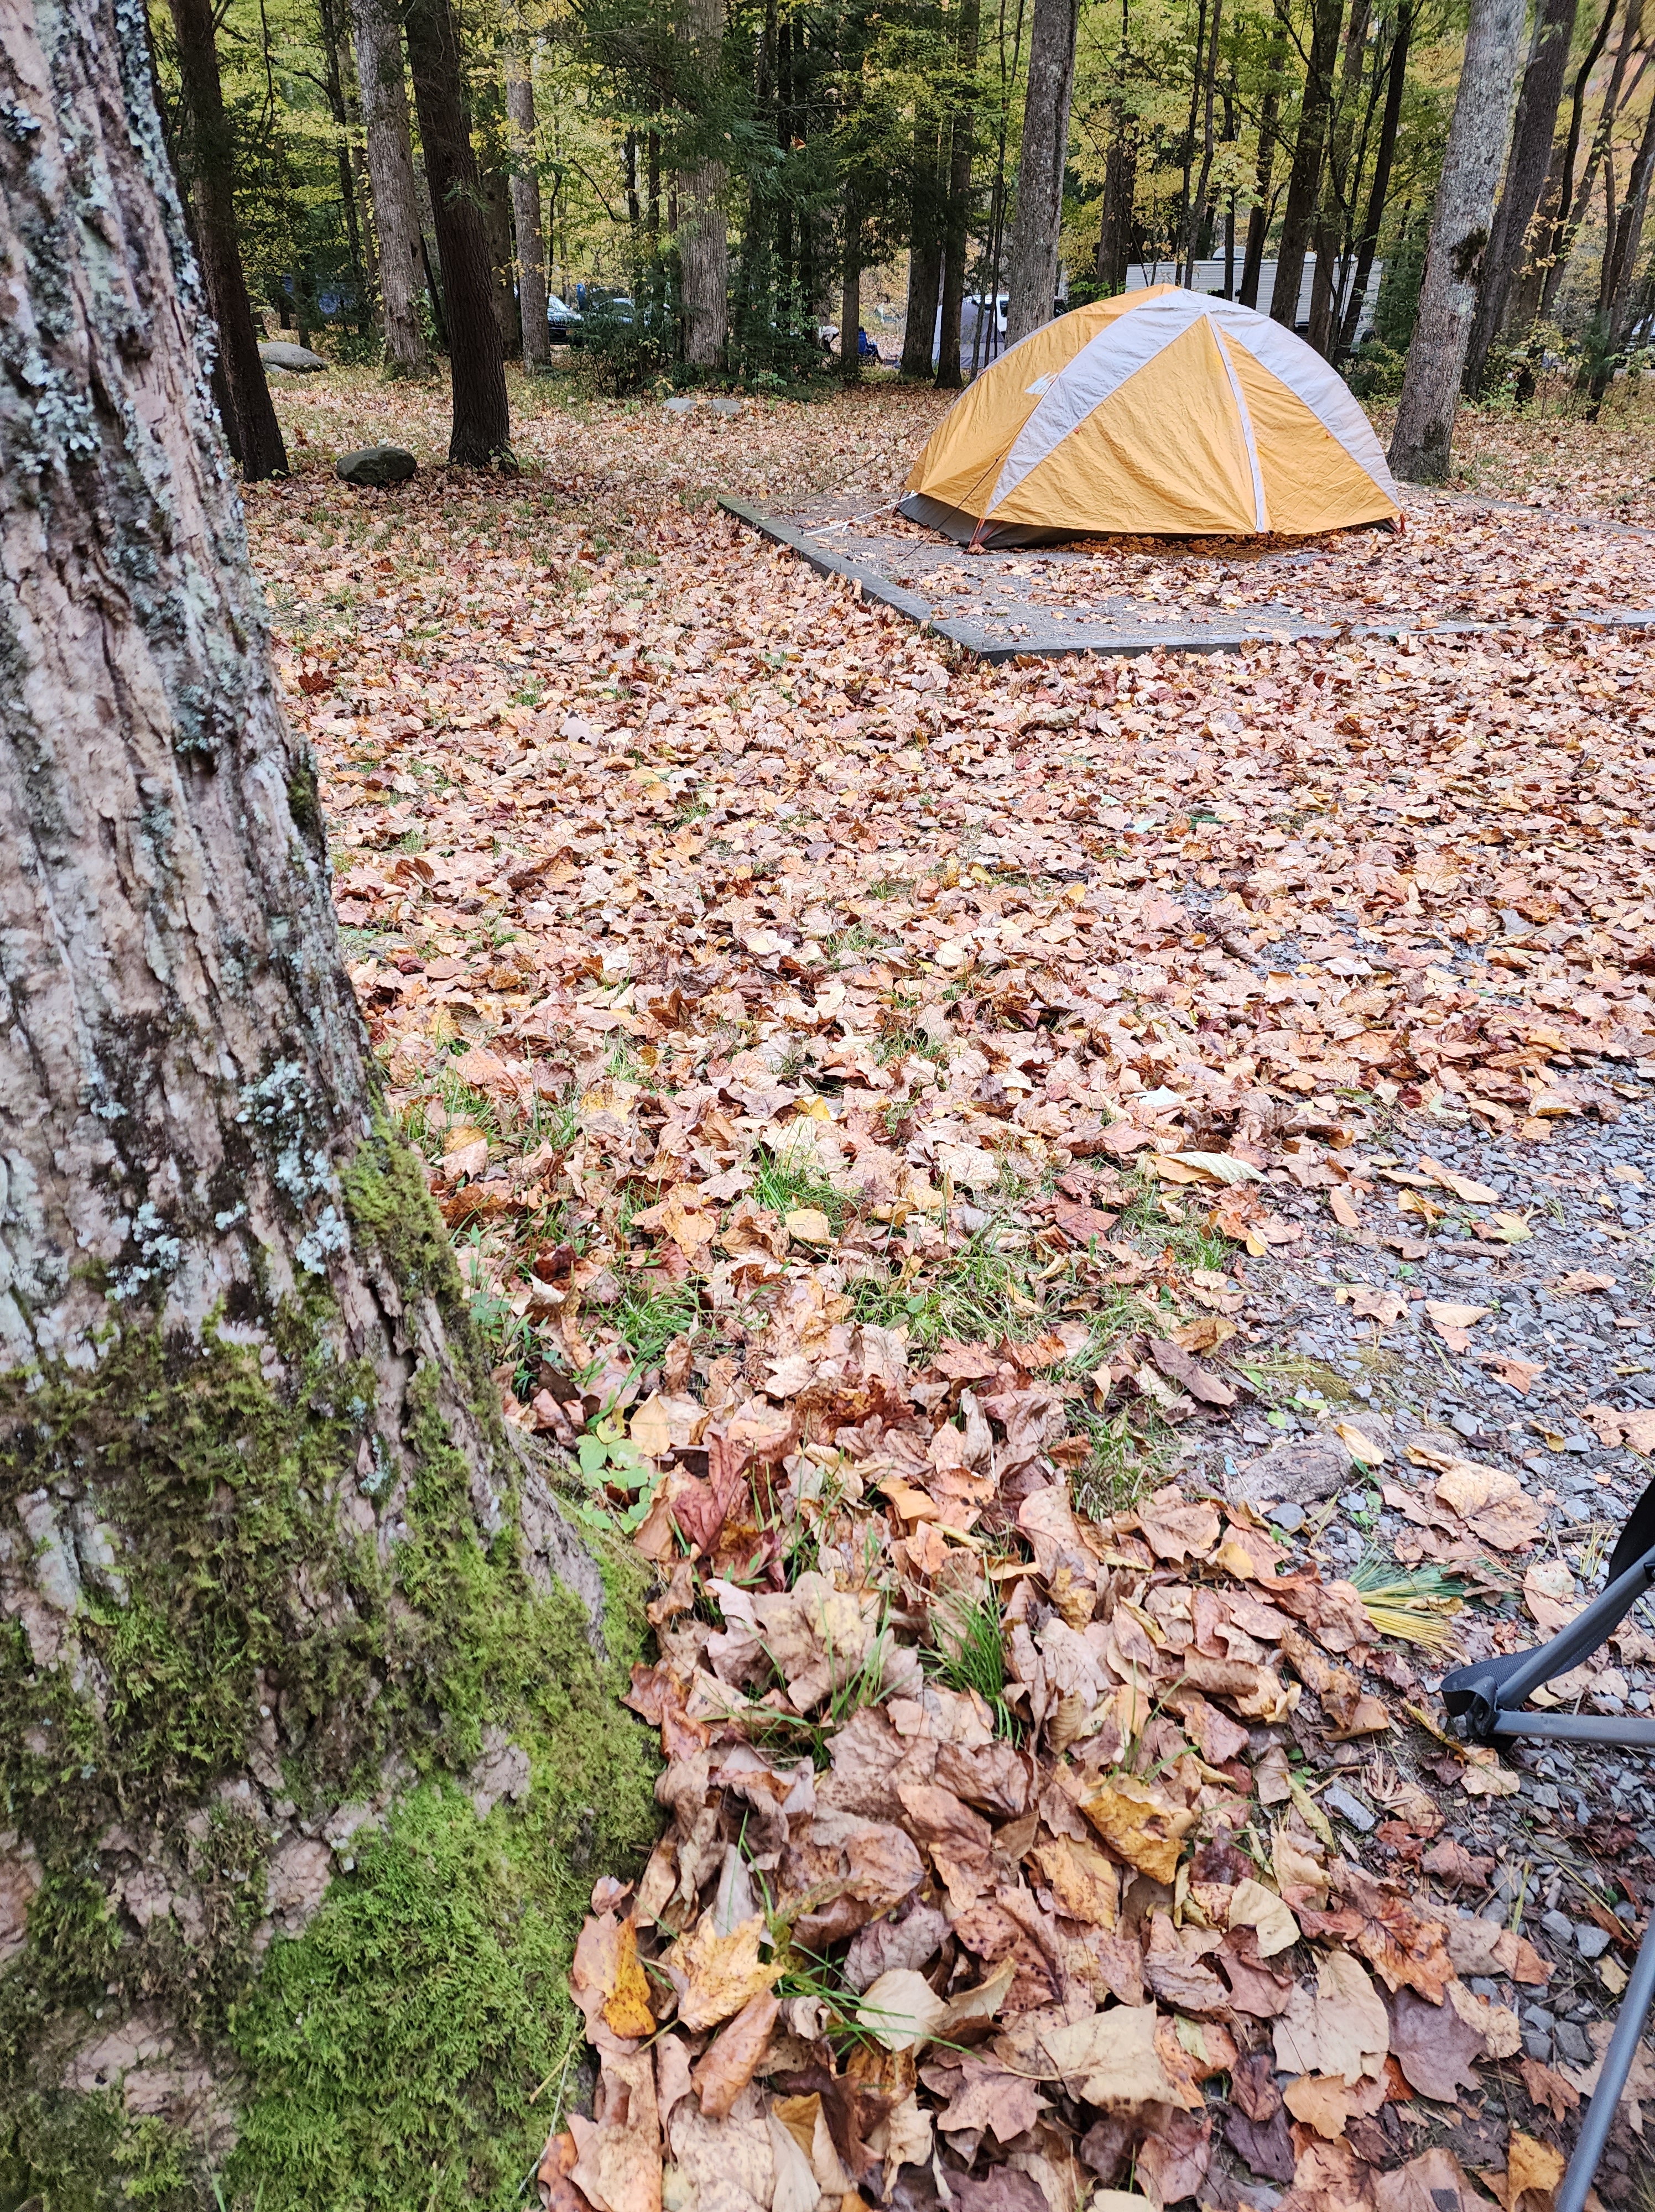 A small yellow tent in the middle of trees and fallen leaves on the ground.